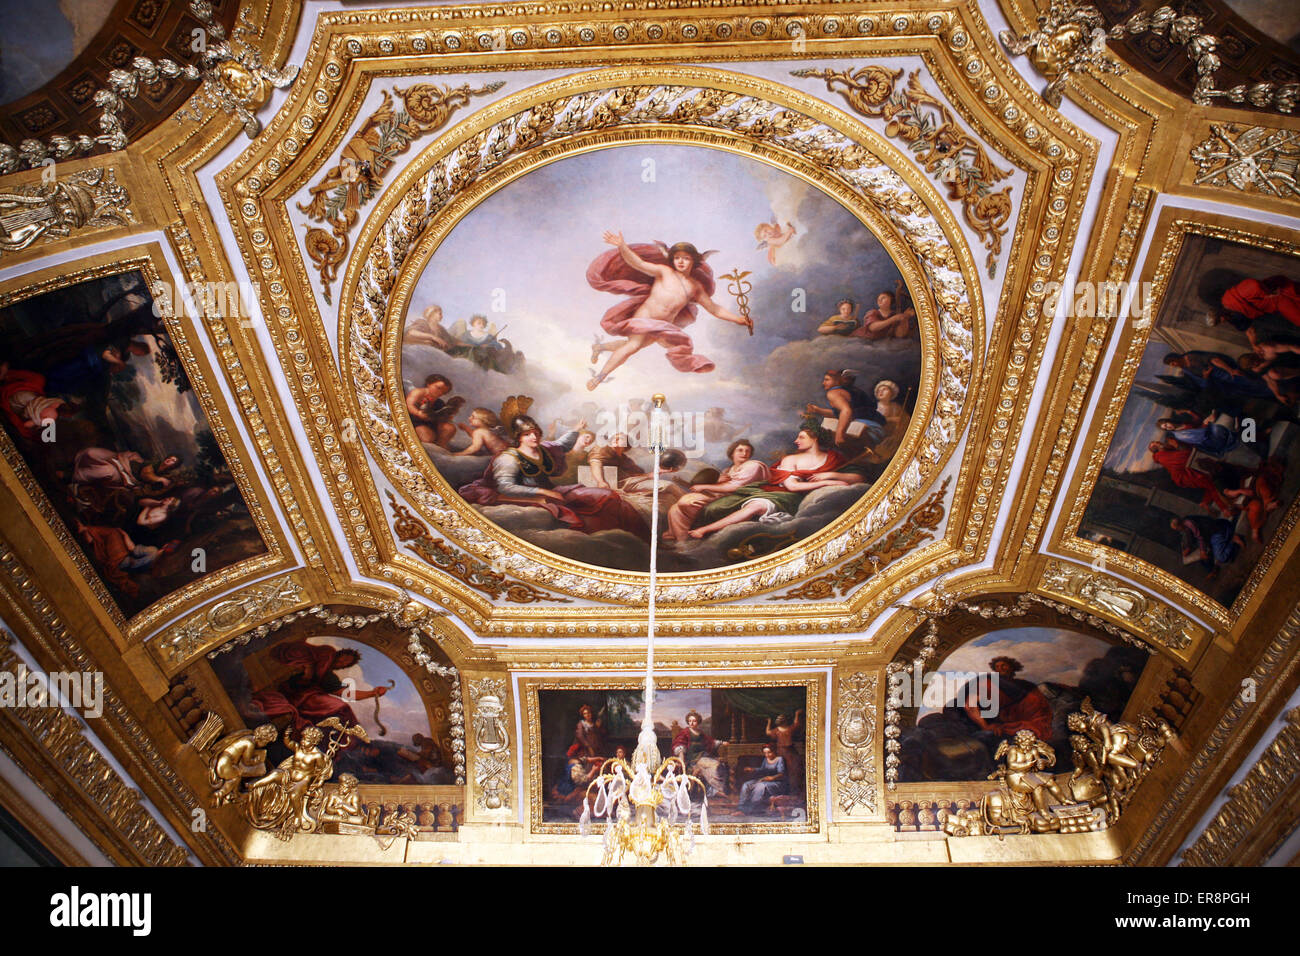 Ceiling of the Queen's nobles room (formerly an antechamber to the bedroom then a cabinet room) Palace  Versailles France Stock Photo